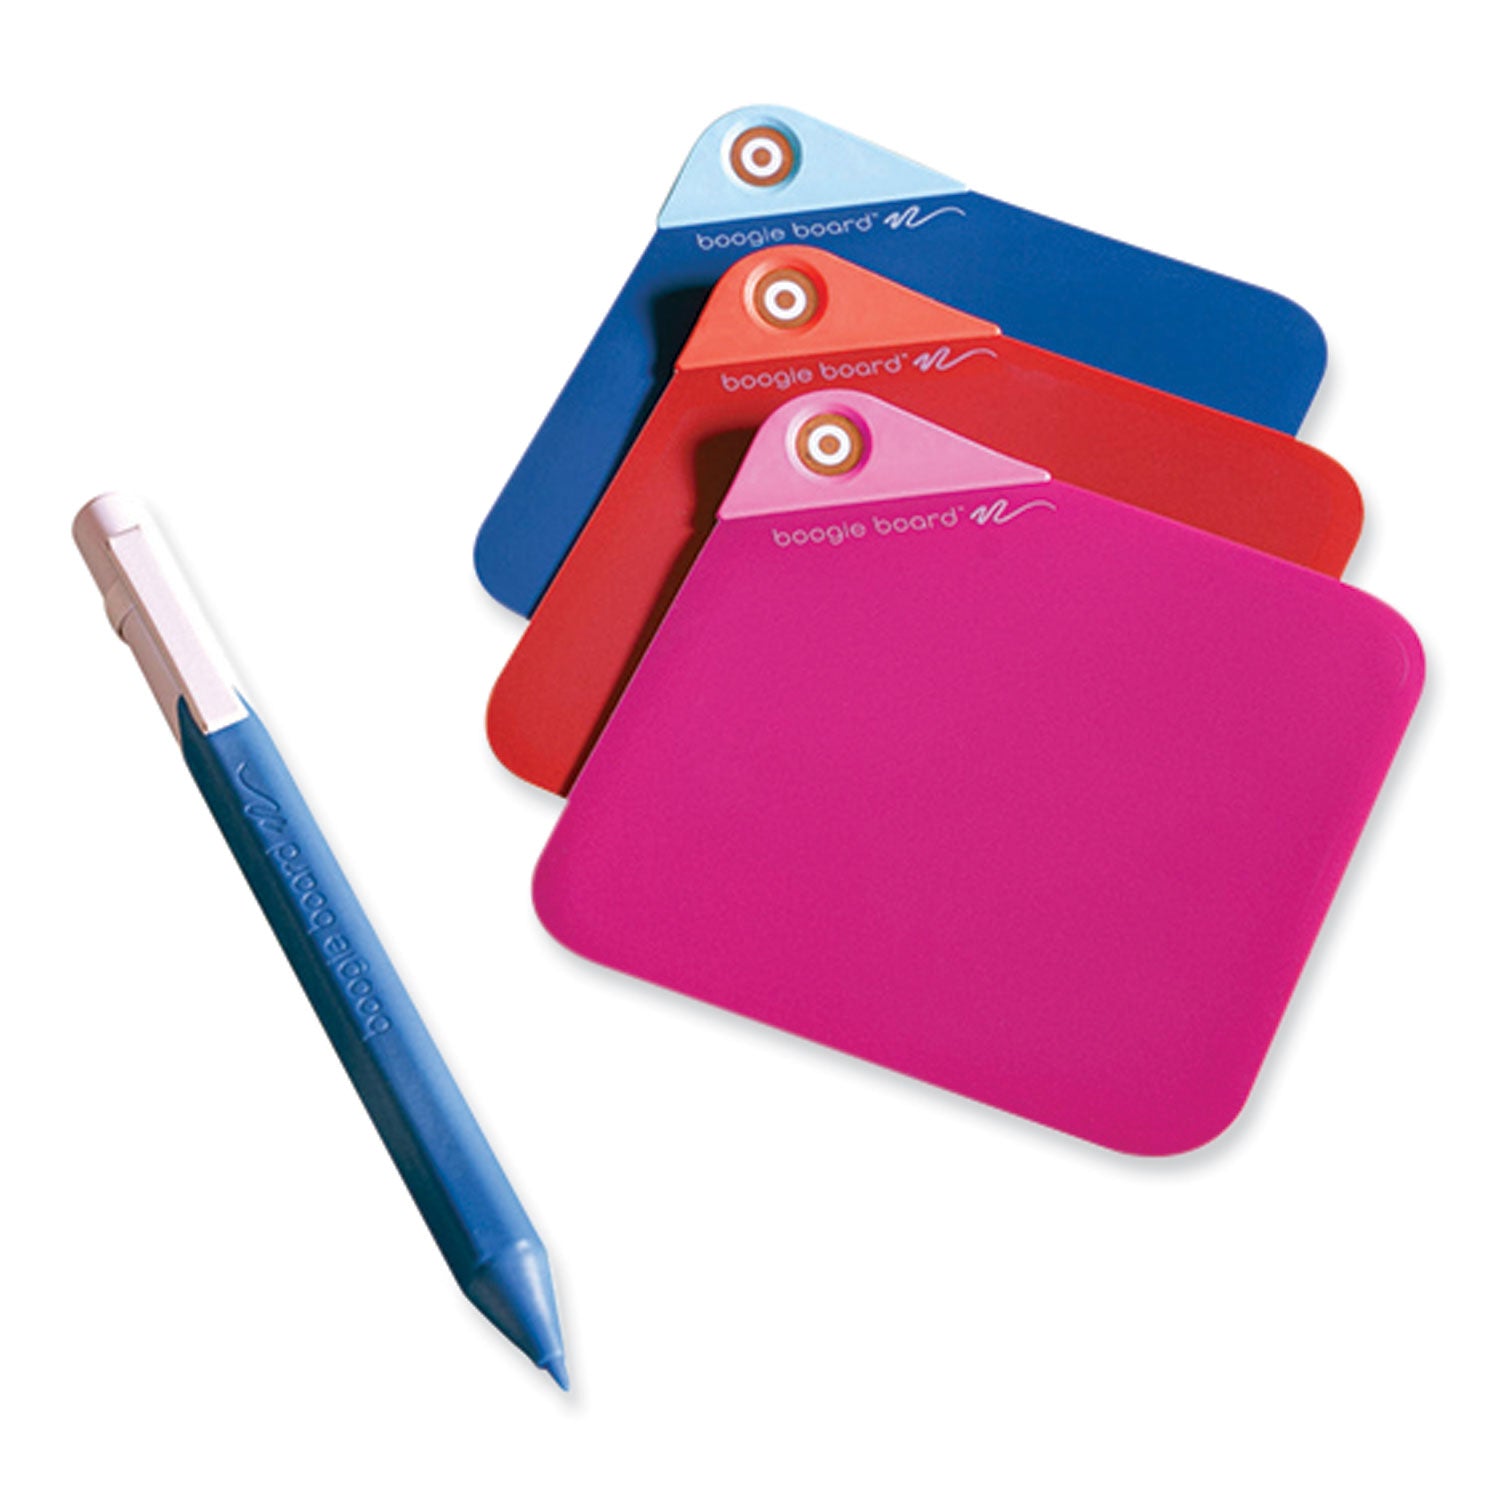 versanotes-starter-pack-reusable-notes-three-assorted-color-notes-plus-pen_imv10m60001 - 2